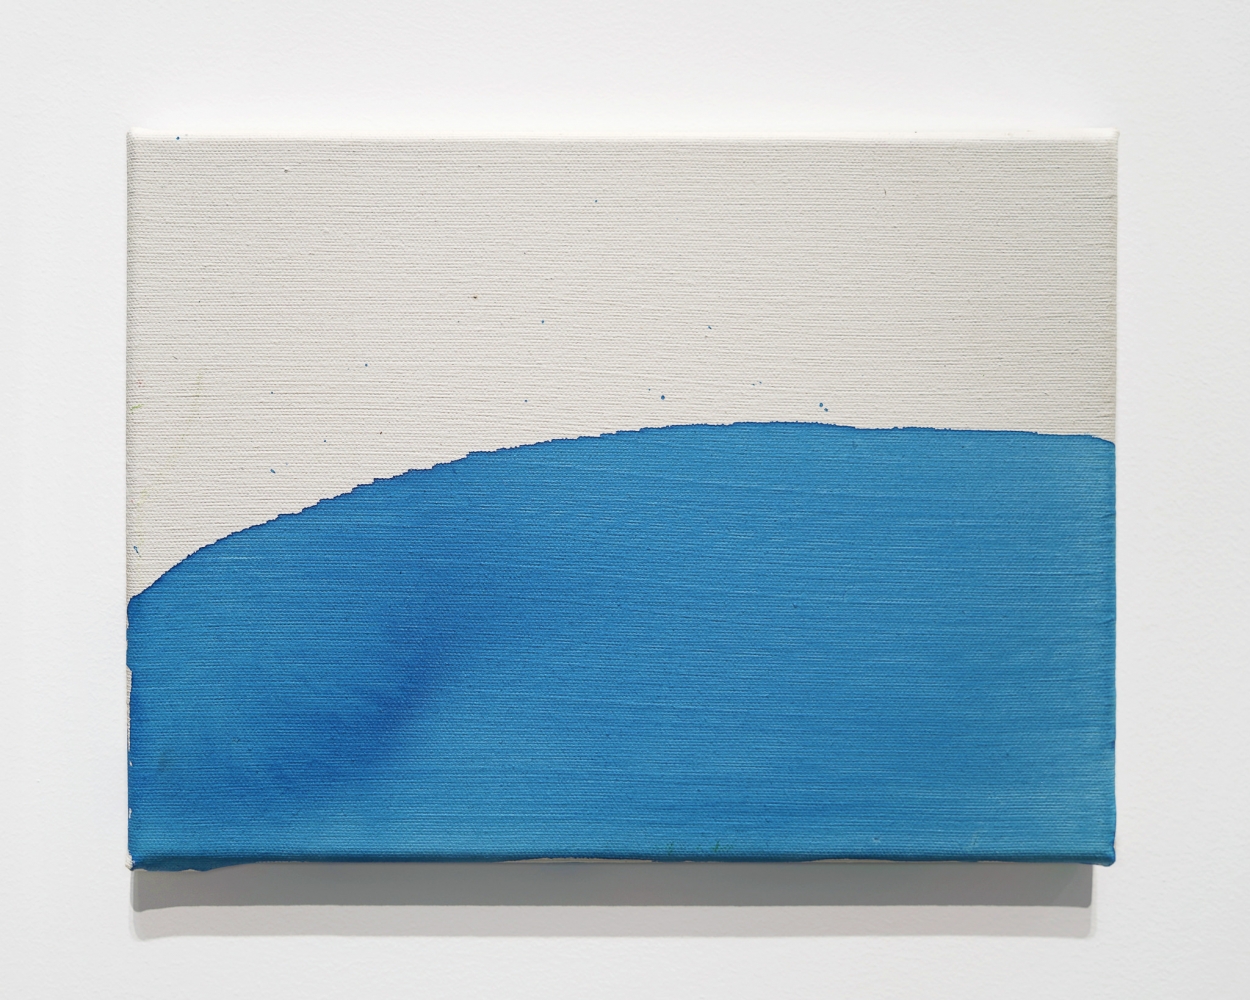 Mary Heilmann

Clear Day

2020

9 x 12 inches (22.9 x 30.5 cm)

Signed, titled, dated verso

MH 702

$65,000

&amp;nbsp;

INQUIRE